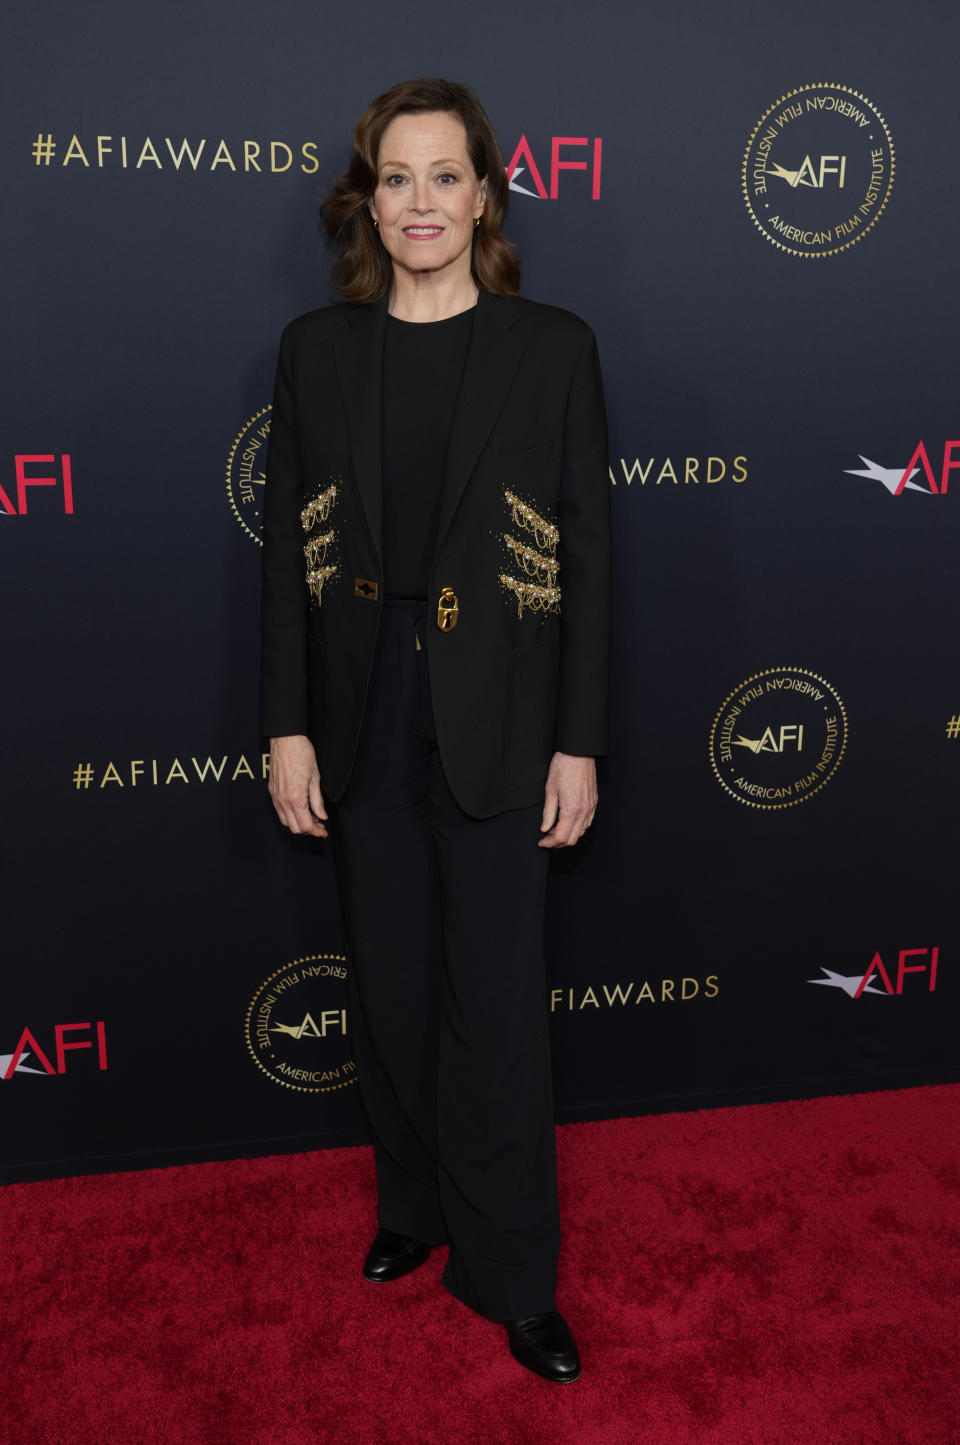 Actor Sigourney Weaver poses at the 2023 AFI Awards, Friday, Jan. 13, 2023, at the Four Seasons Beverly Hills in Los Angeles. (AP Photo/Chris Pizzello)